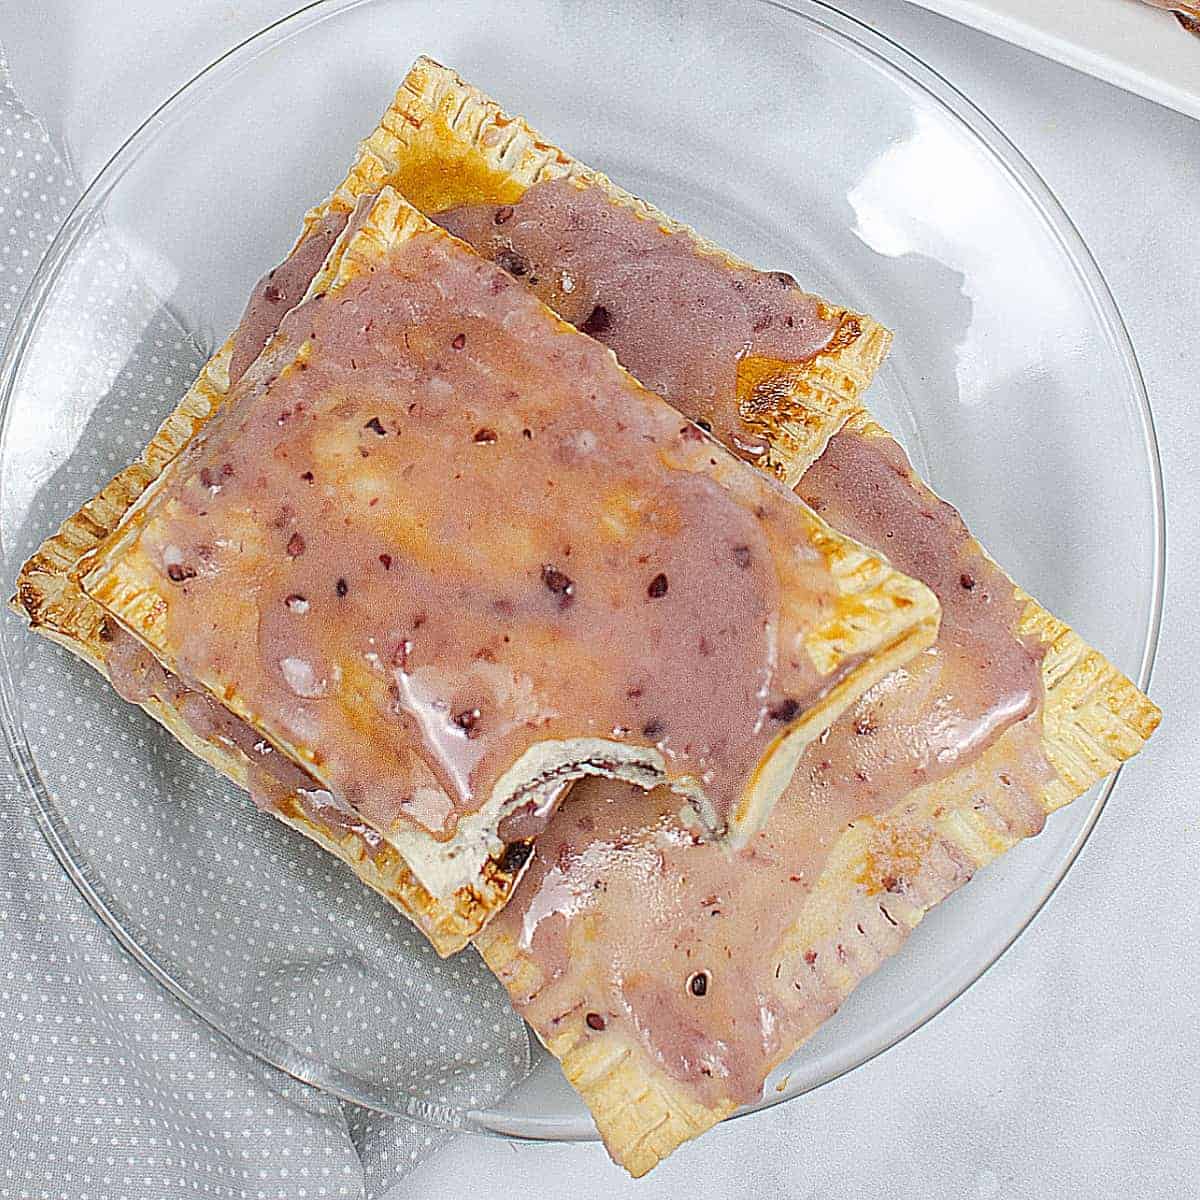 Overhead view of three iced pop tarts on a glass plate.